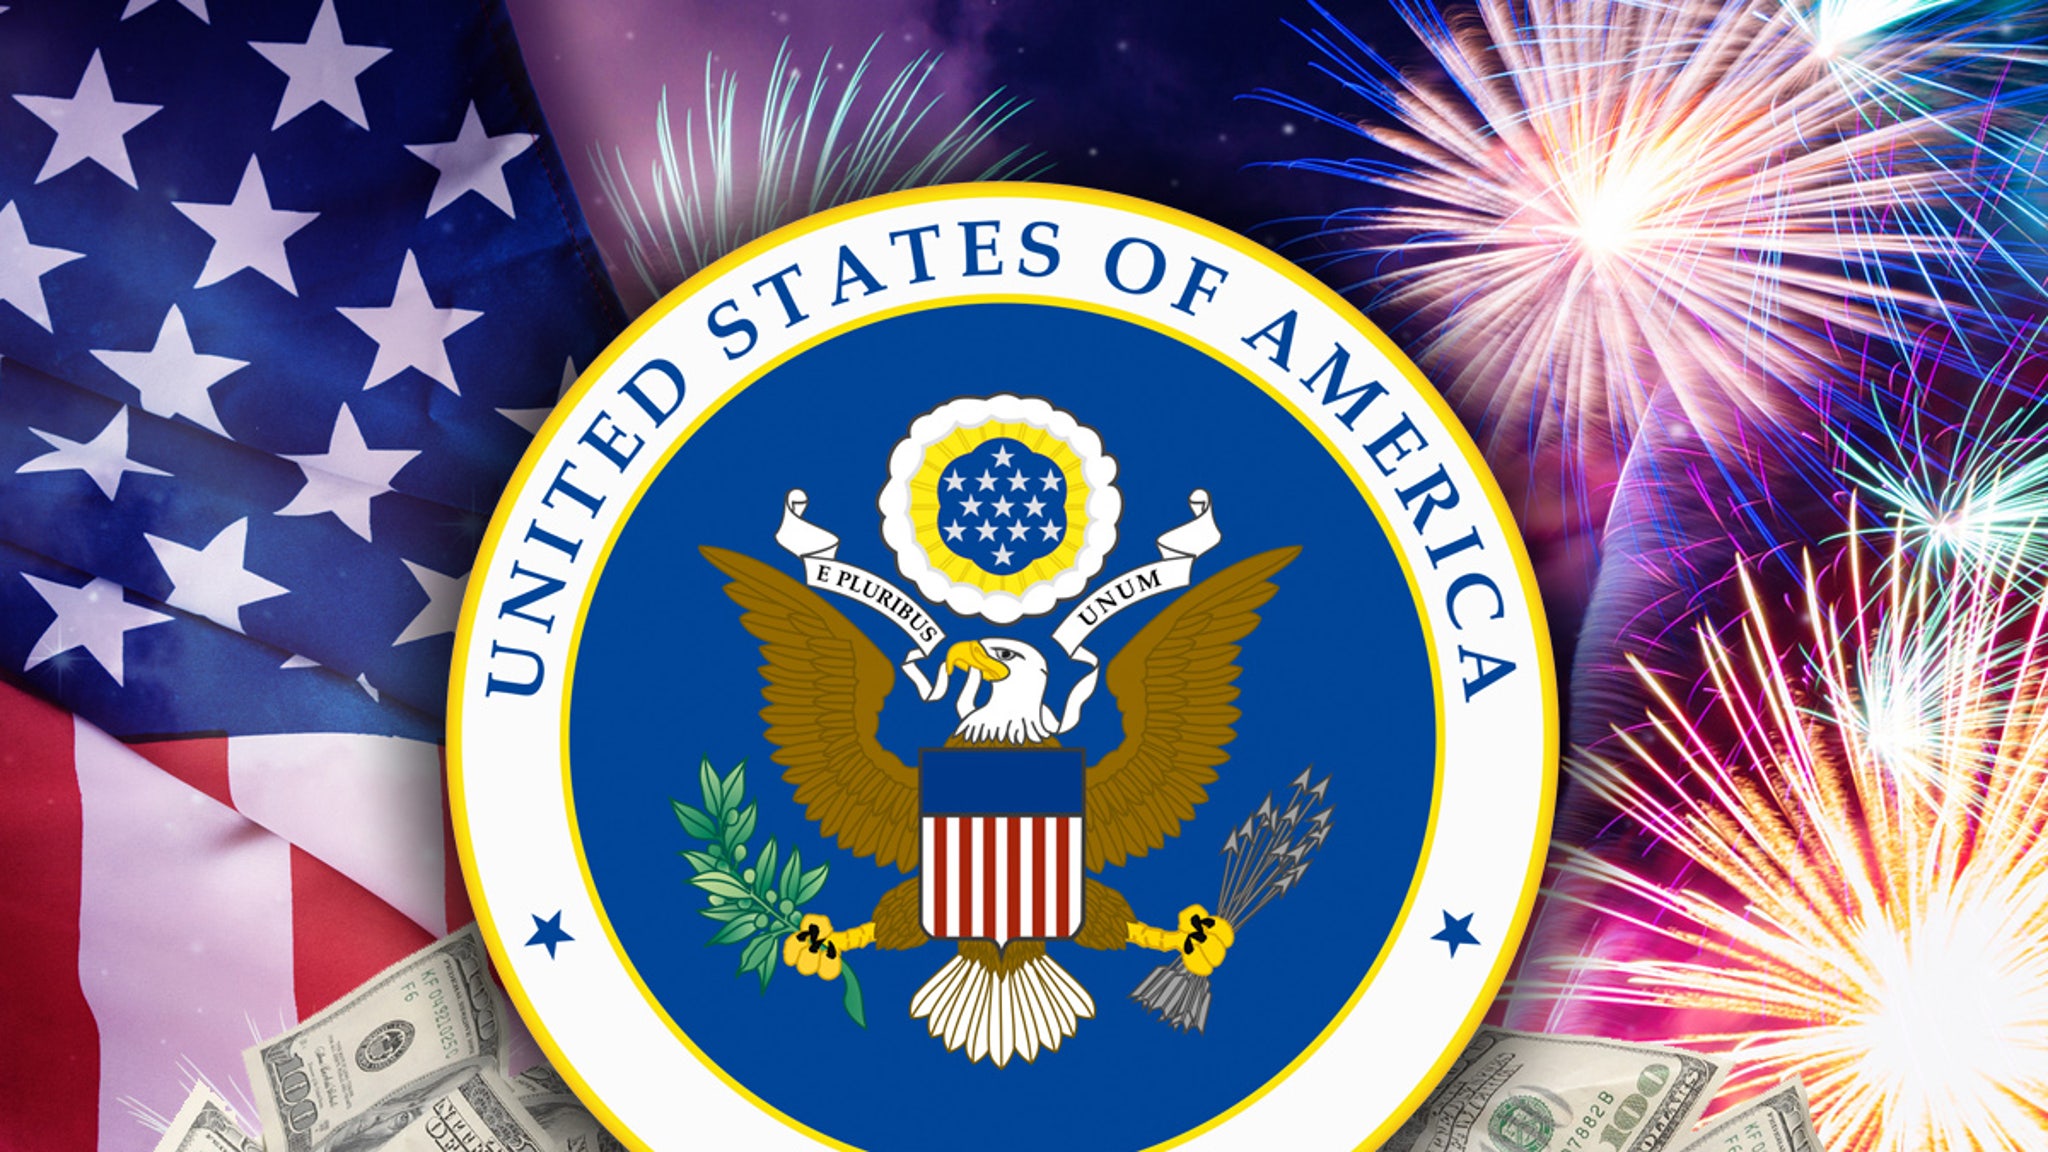 U.S. Embassies Drop Cash on July 4 Parties as American Cities Cancel or Ban Them - TMZ